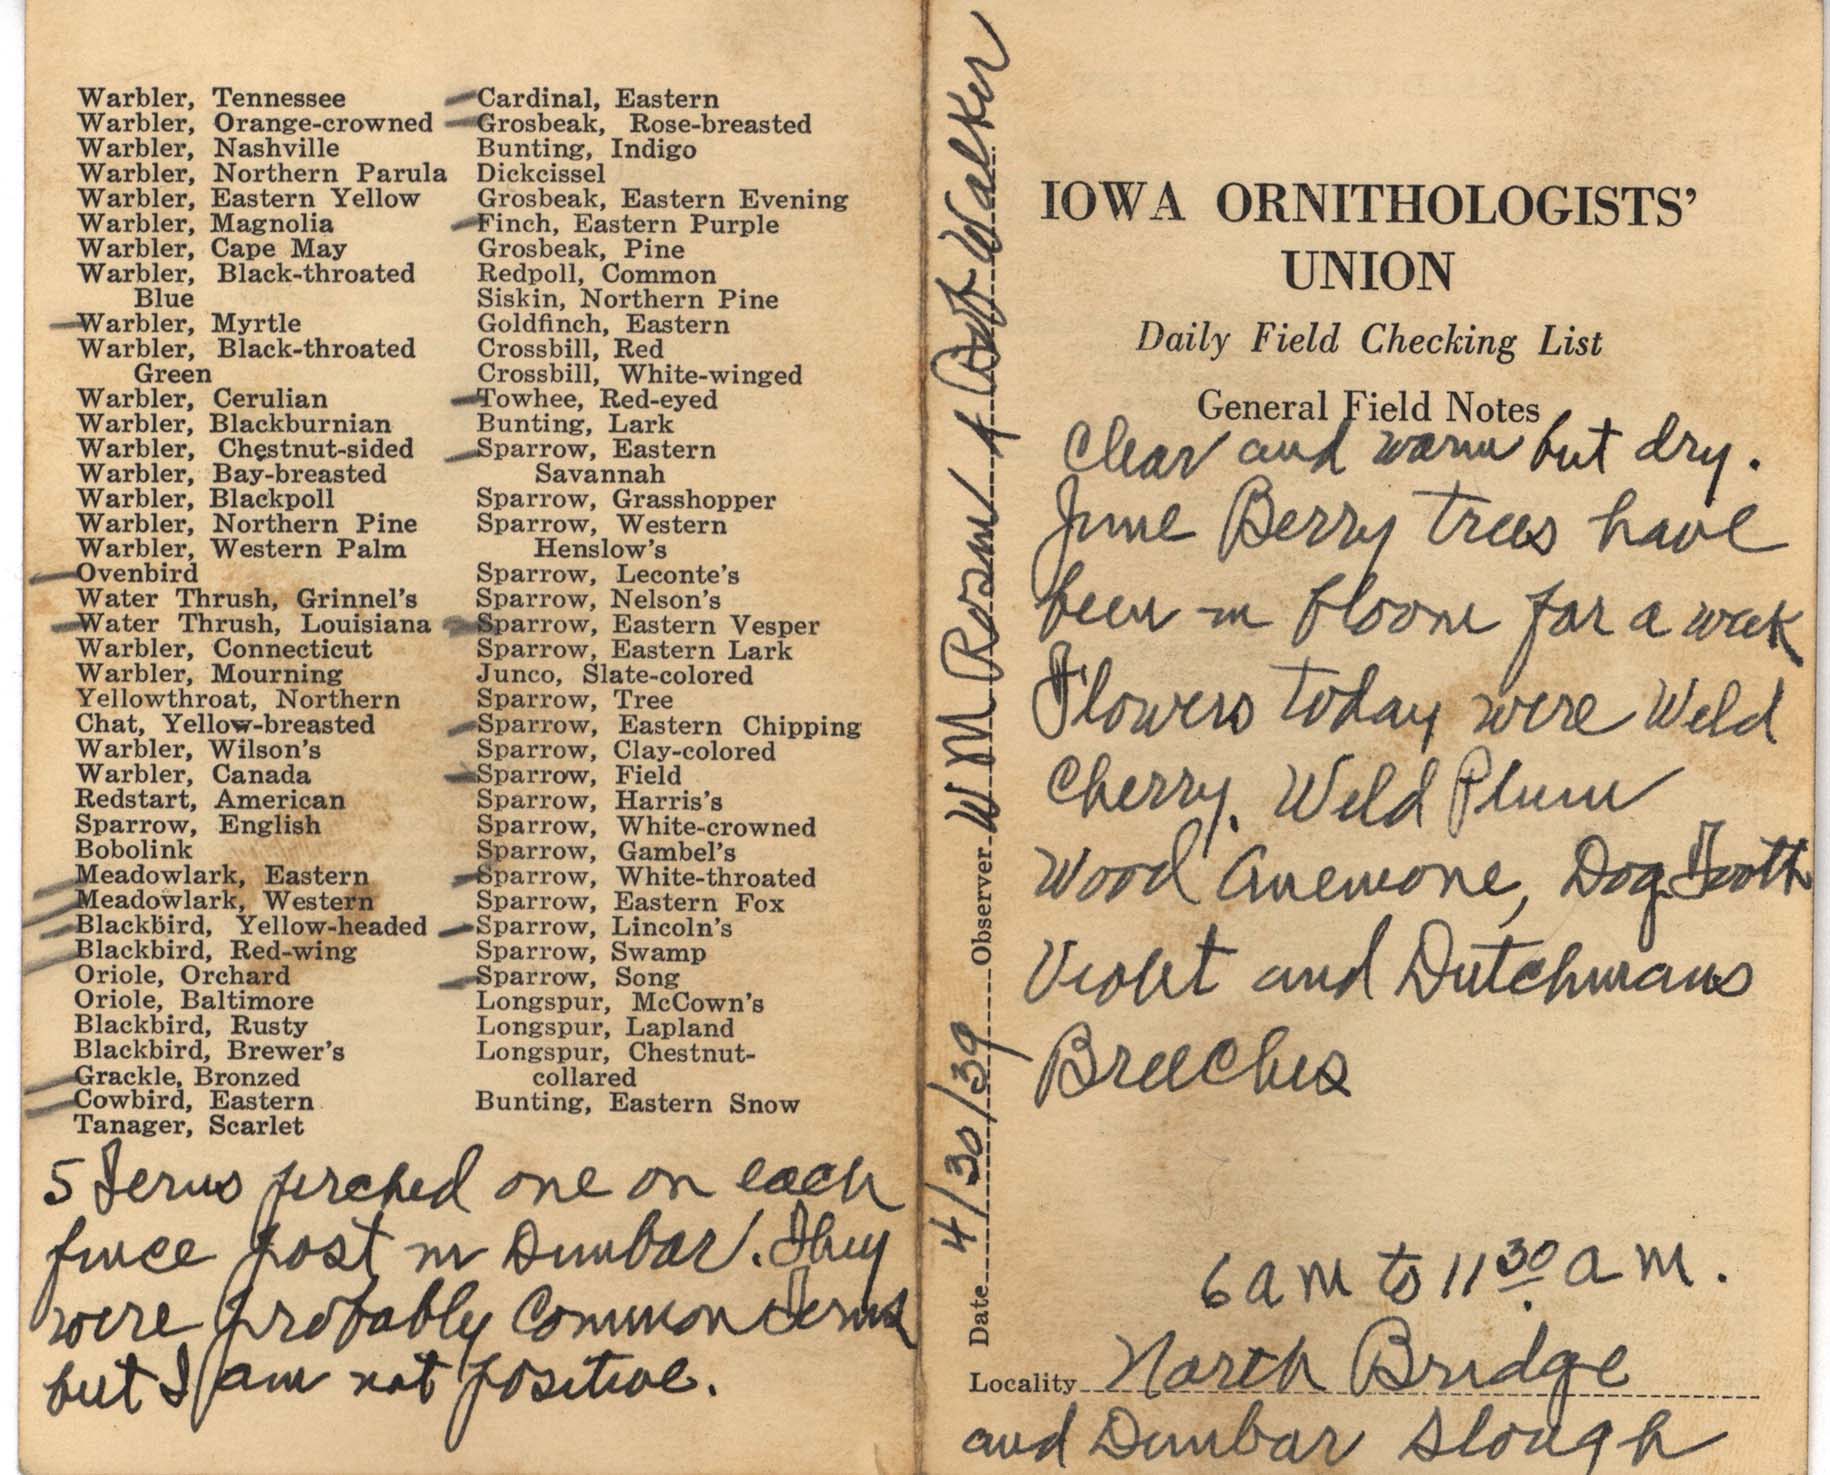 Daily field checking list by Walter Rosene, April 30, 1939